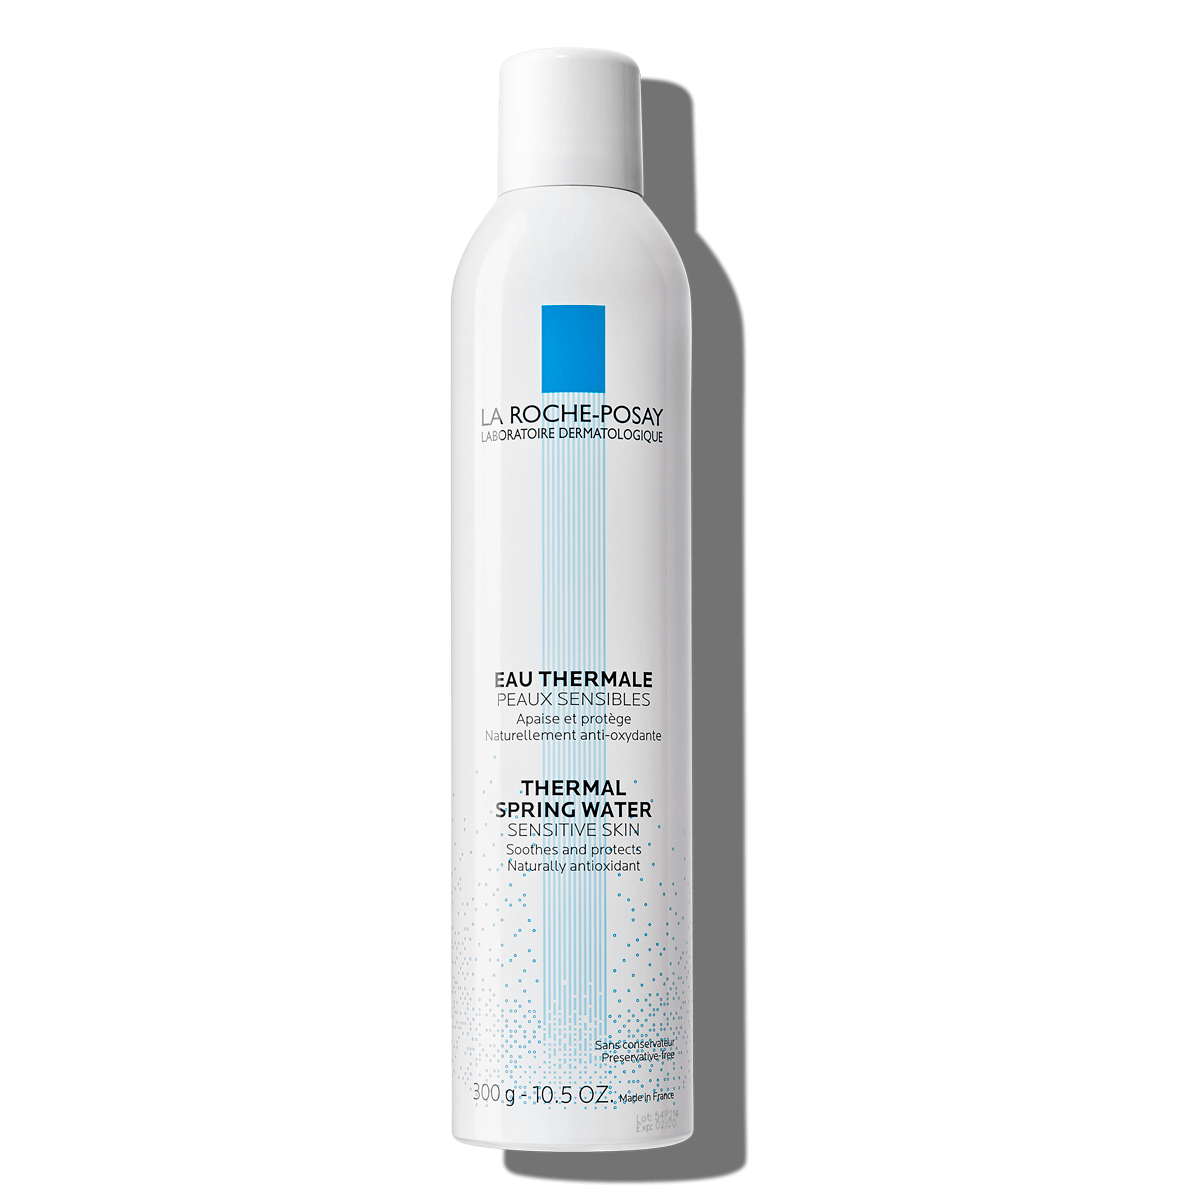 La Roche Posay ProductPage Thermal Spring Water 300ml 3433422404403